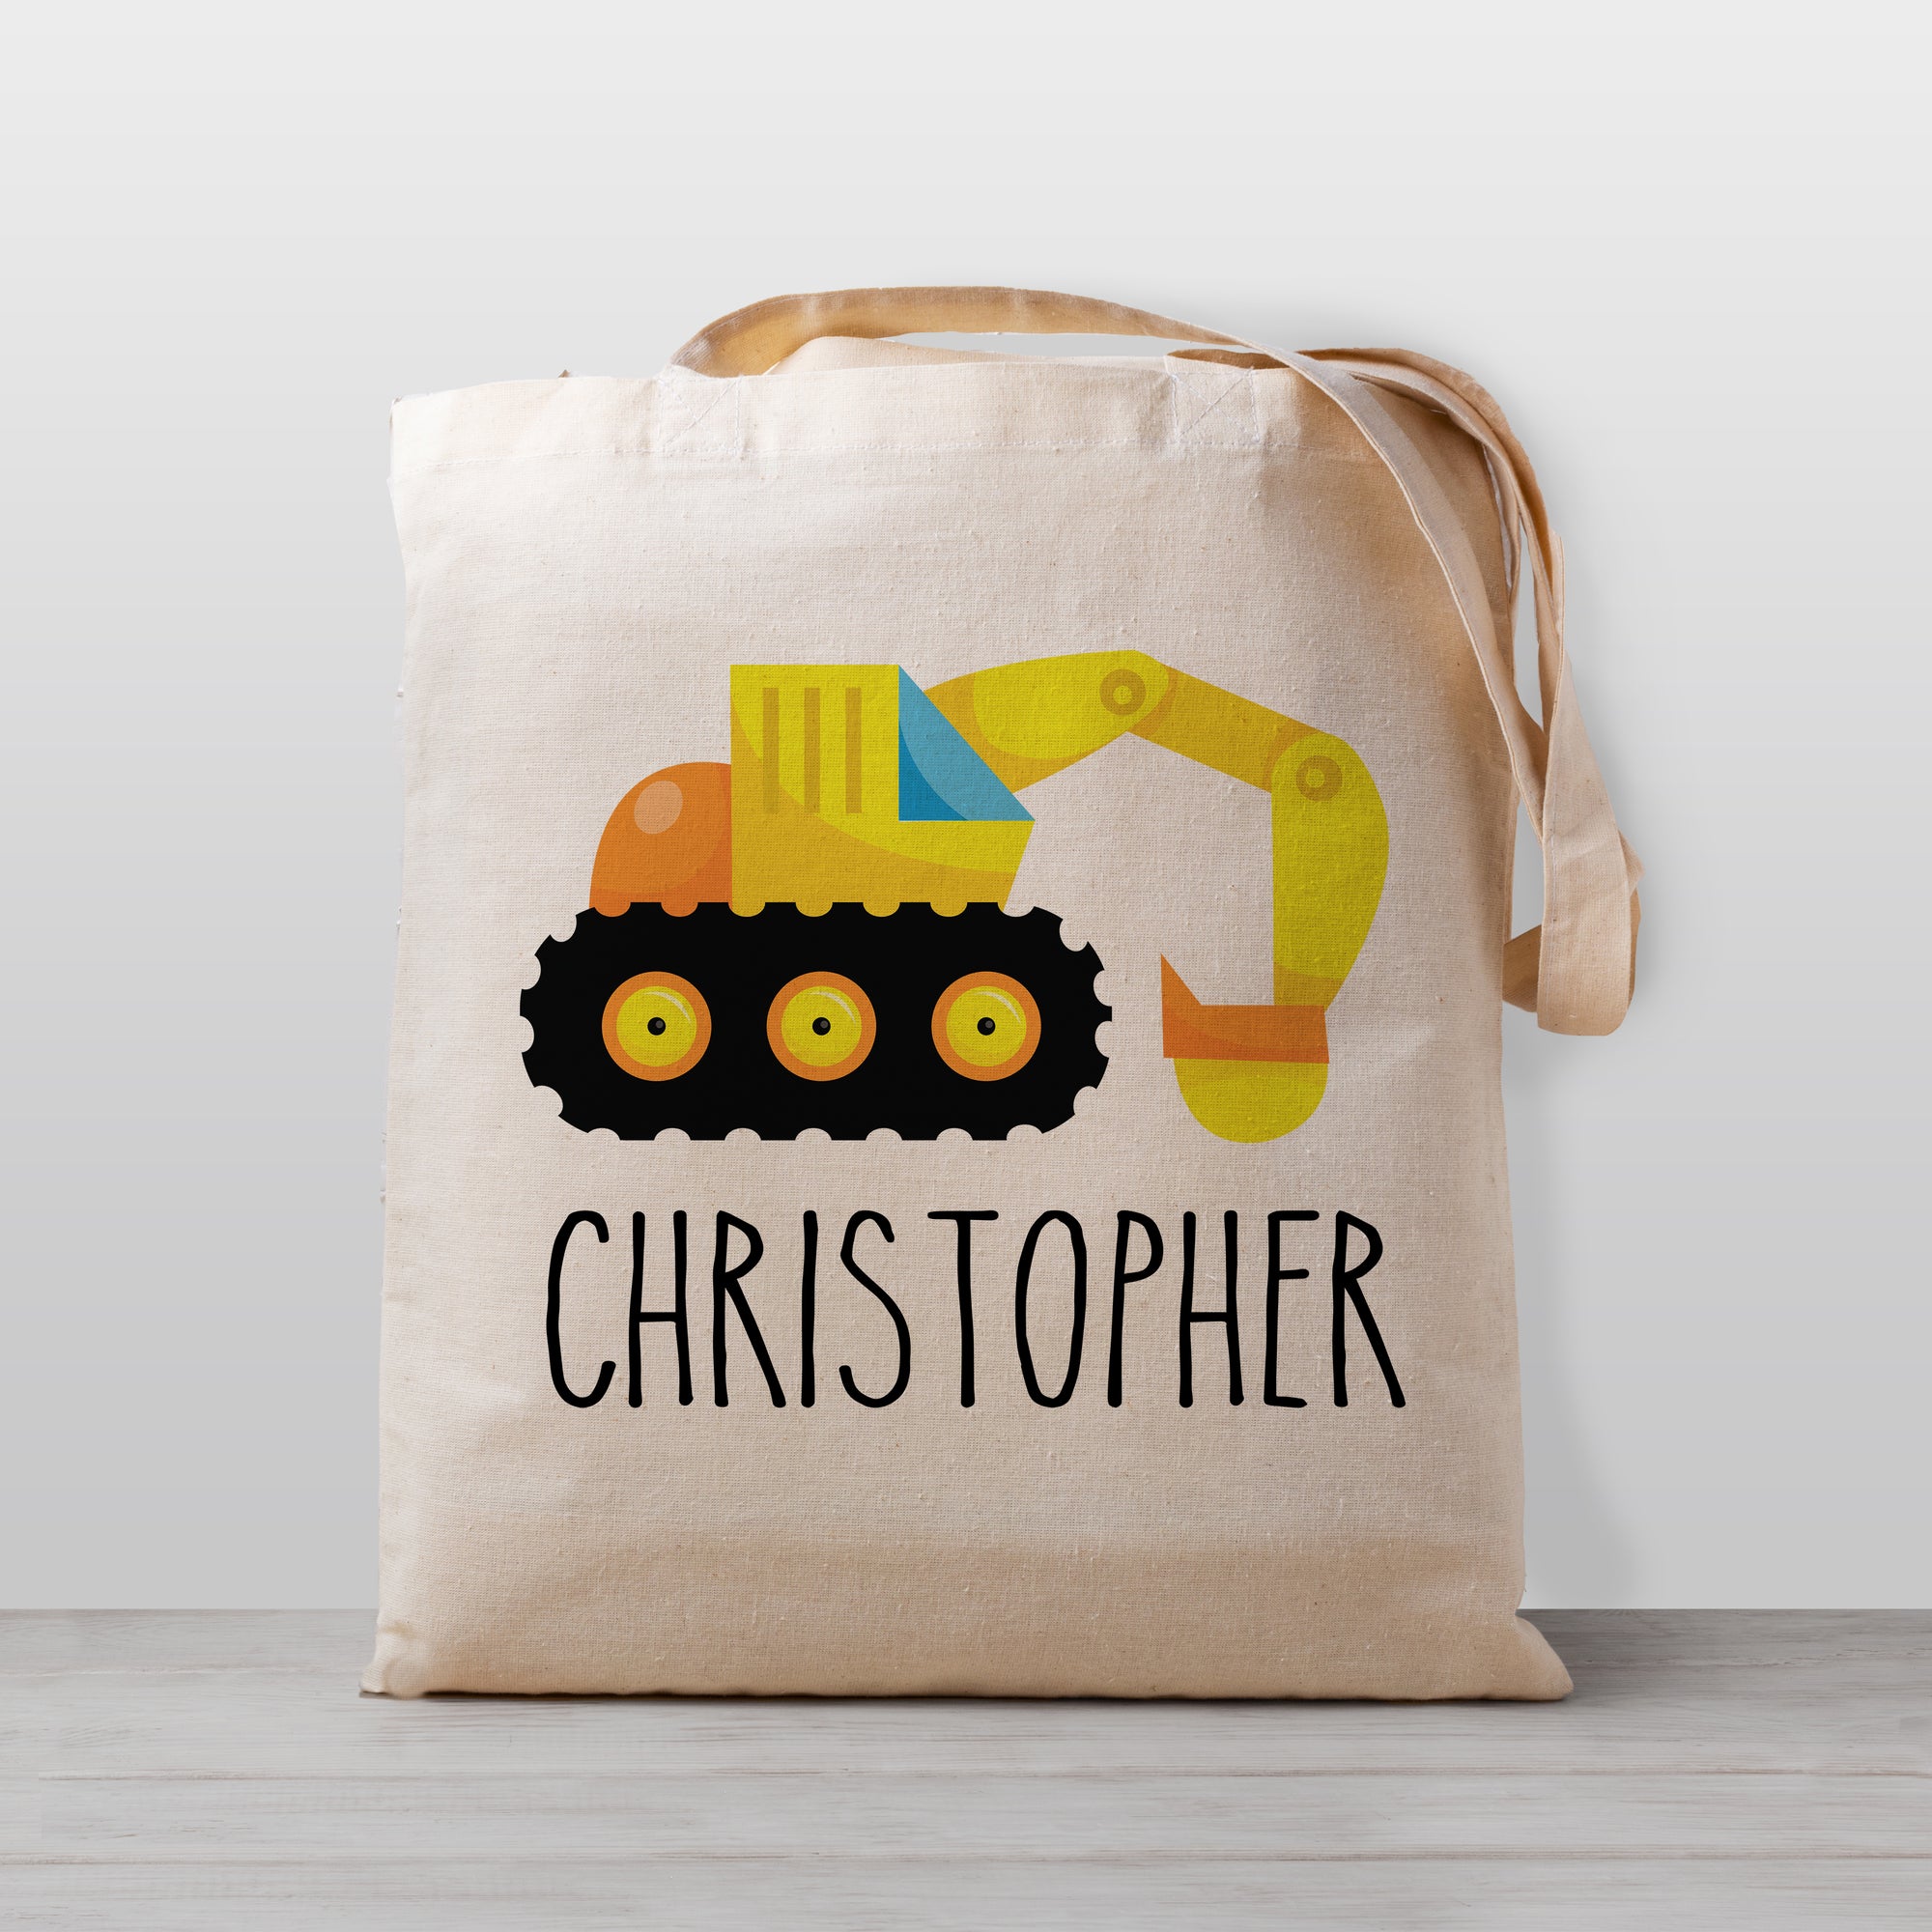 Backhoe personalized tote bag, excavator for construction, 100% natural cotton canvas